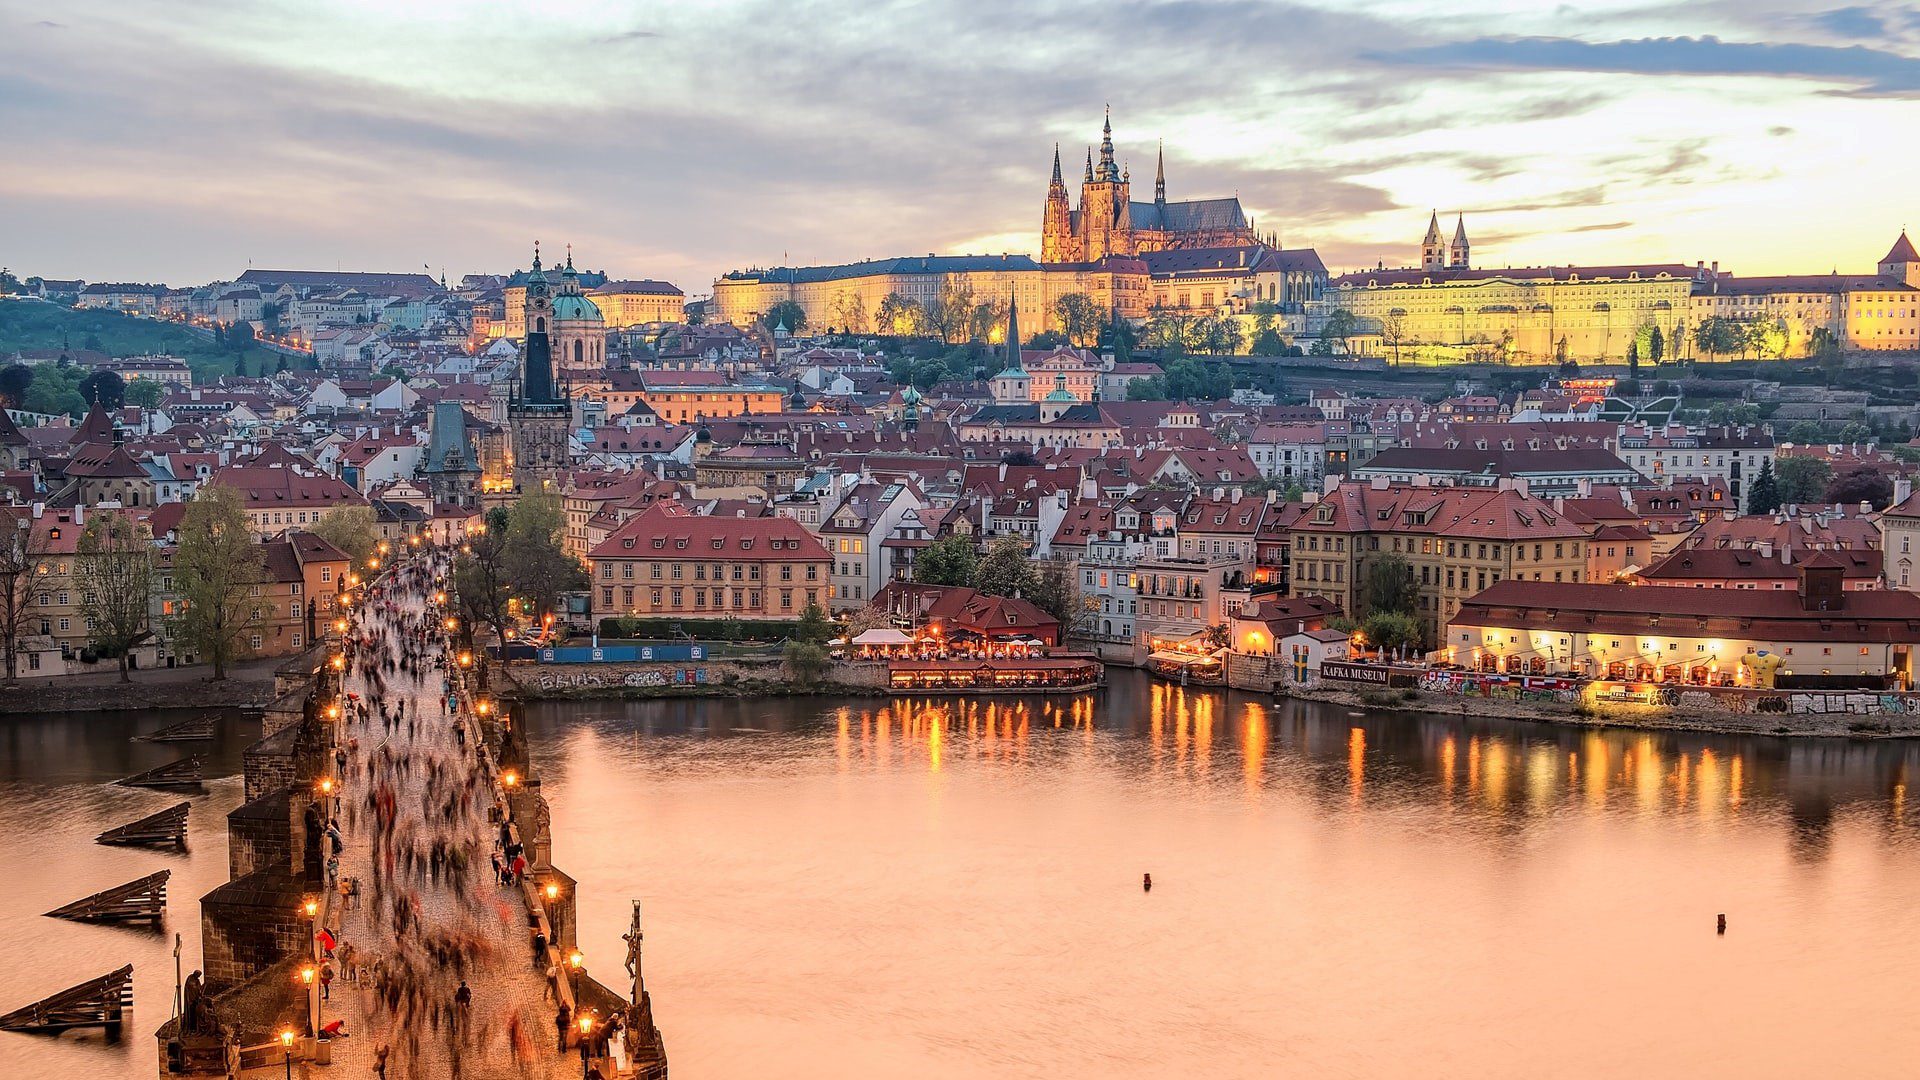 Absent from last year’s calendar, LibertyCon Europe is back! ESFL's flagship event will be held in Prague, Czechia, on April 23-24, 2022.